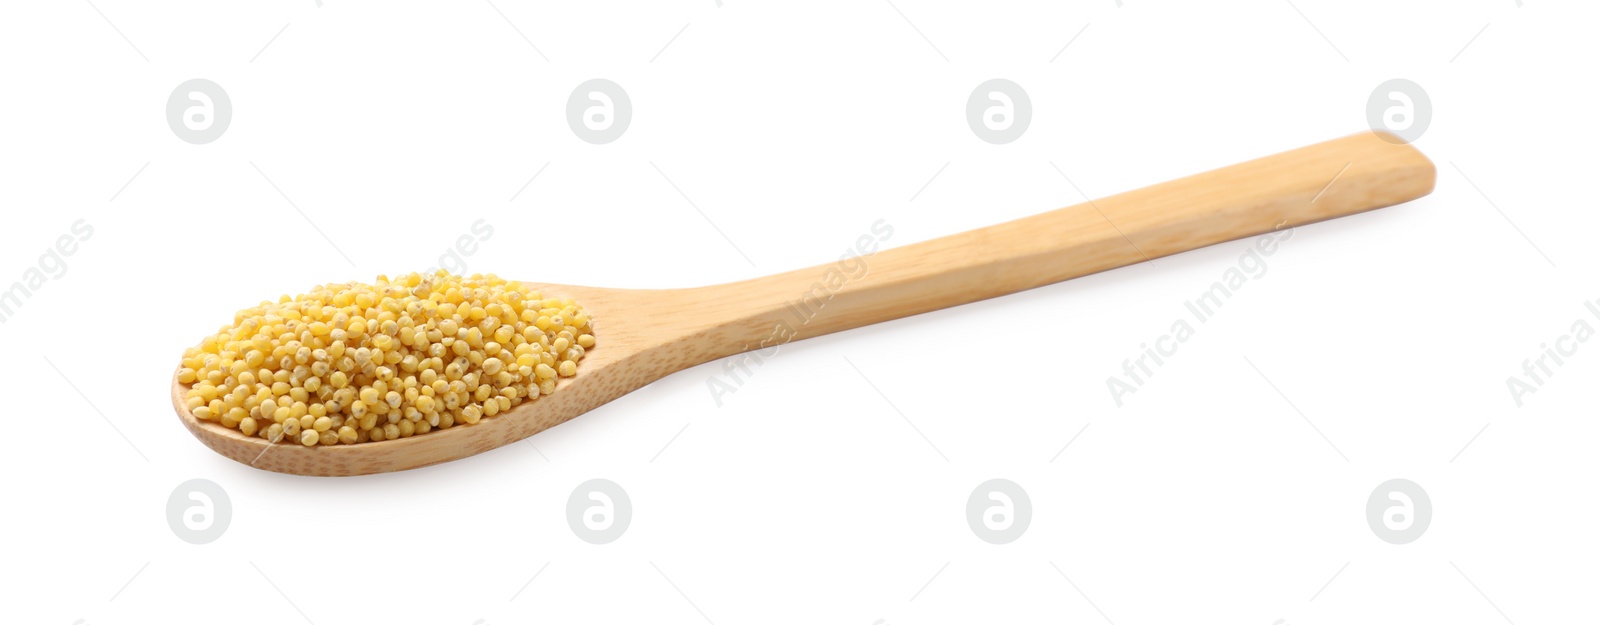 Photo of Wooden spoon with millet groats isolated on white